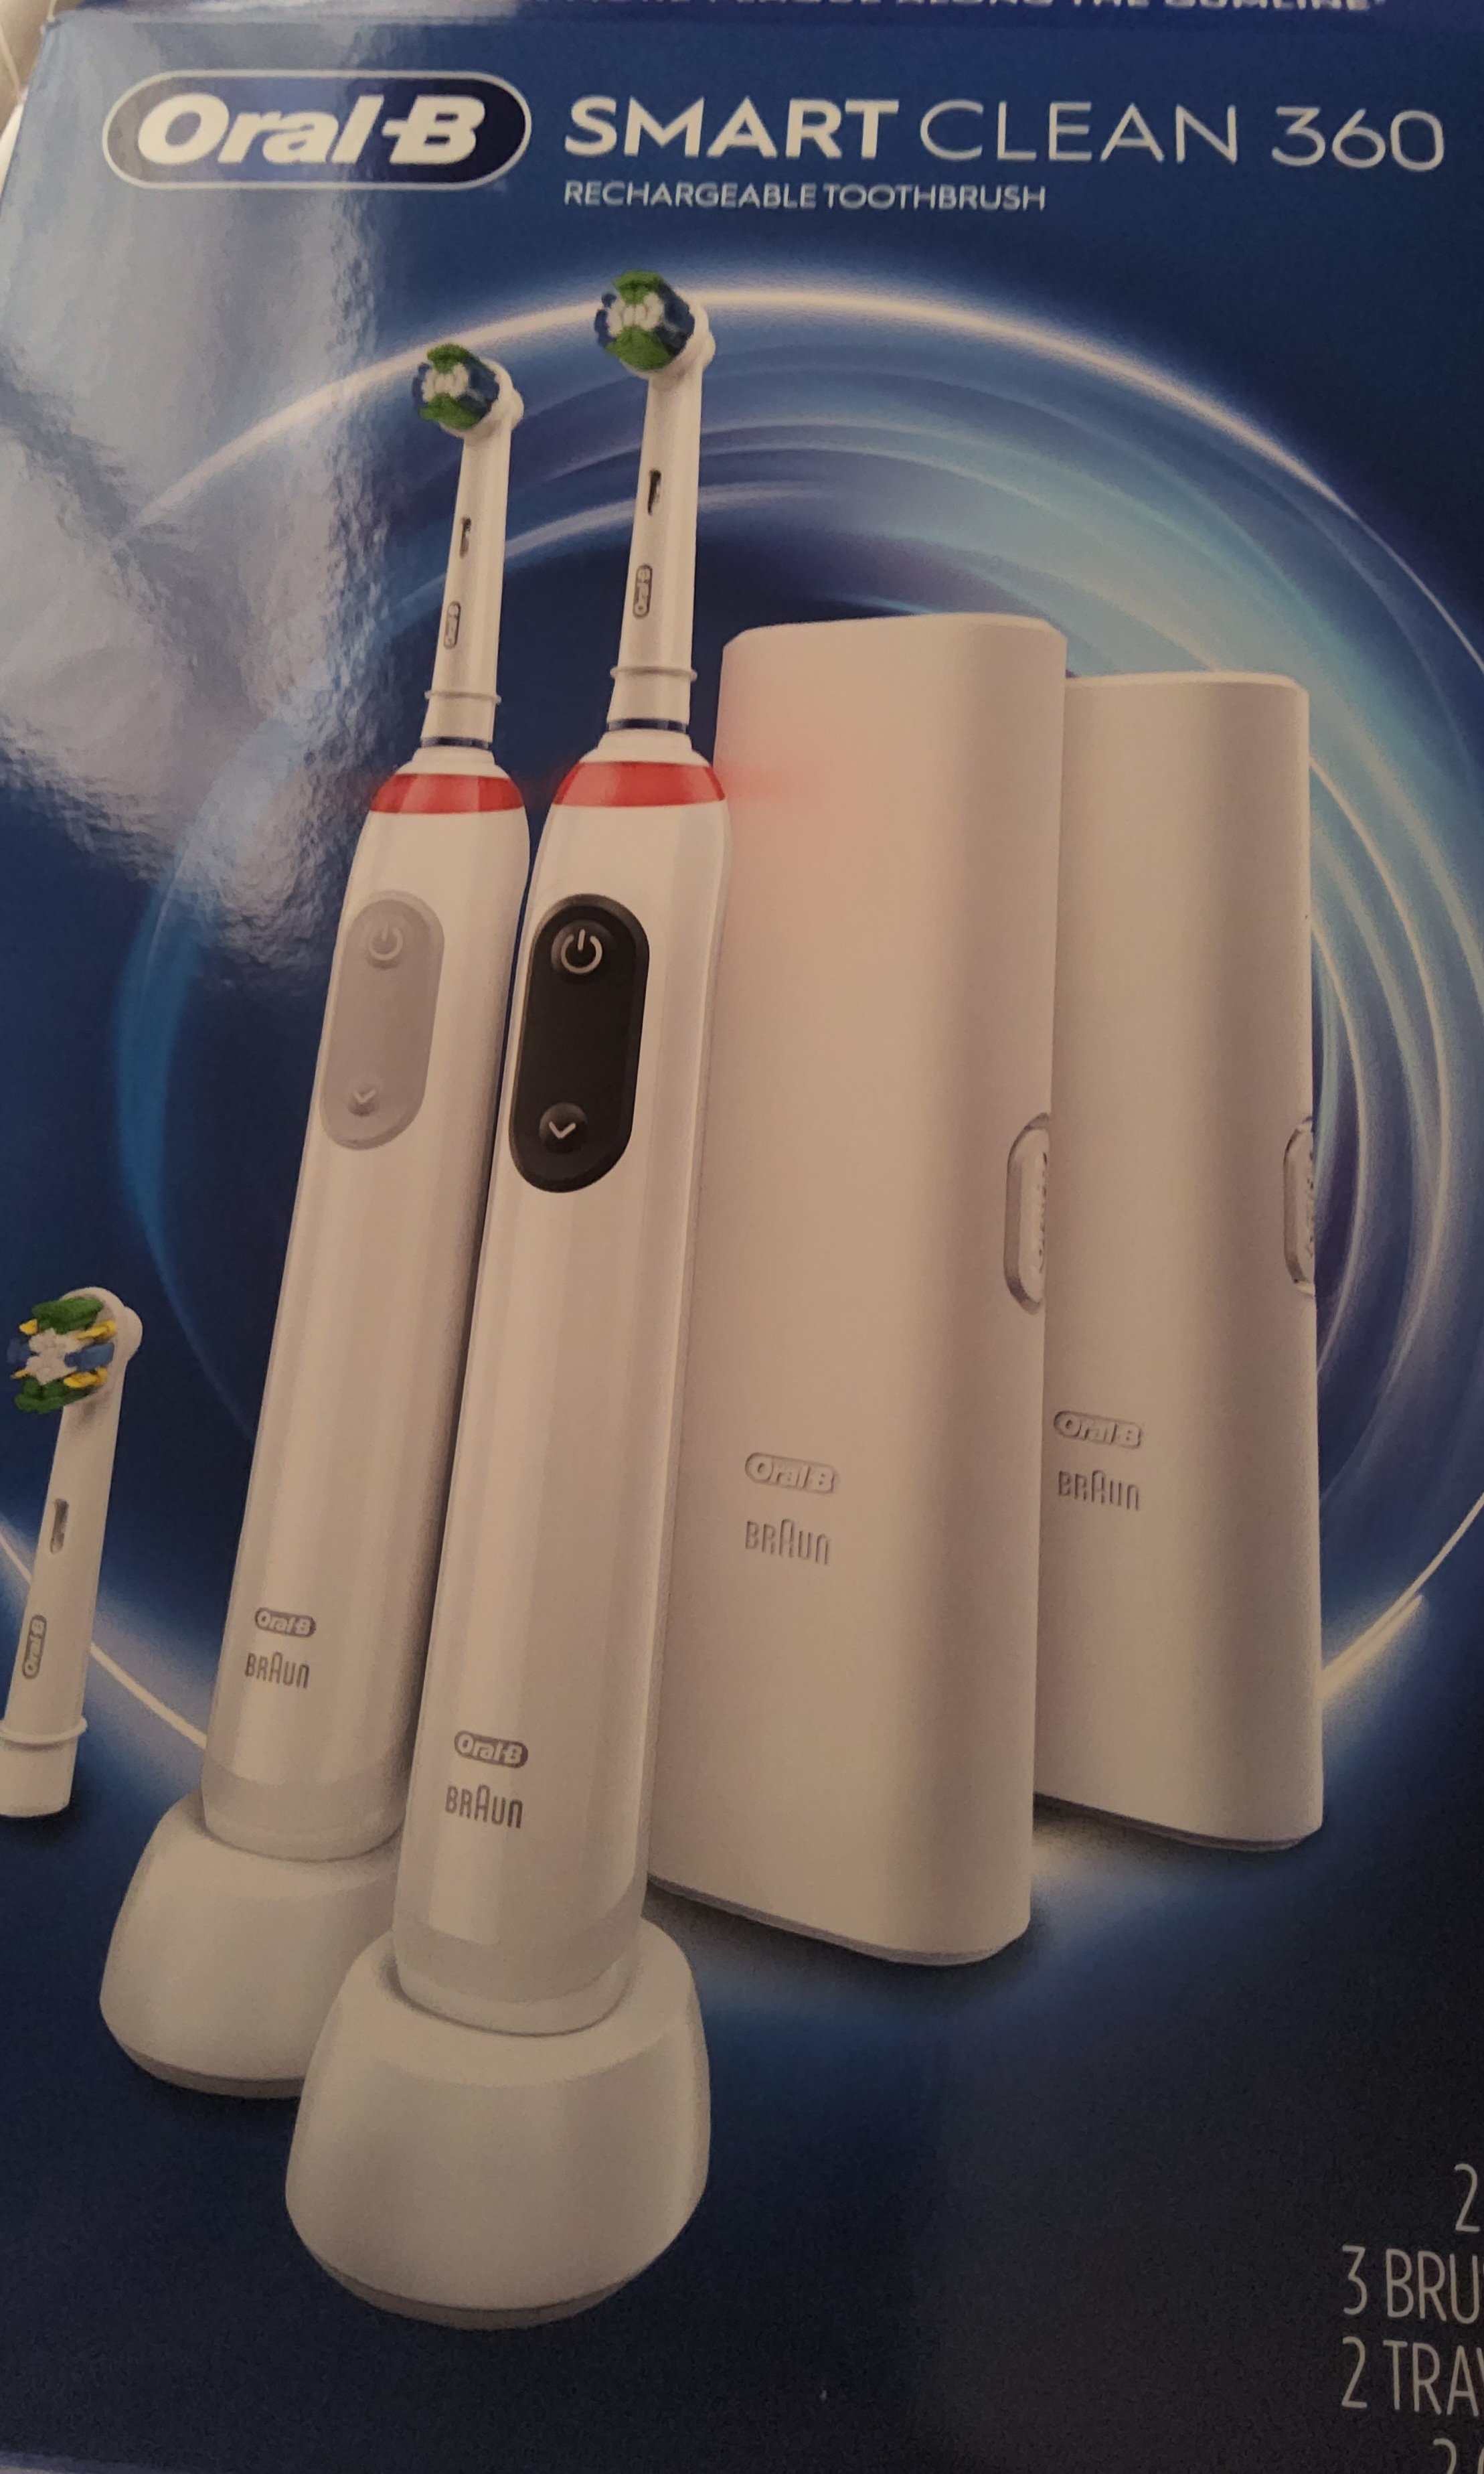 Upgraded! Oral-B Smart Clean 360 2 Pack - $69.99